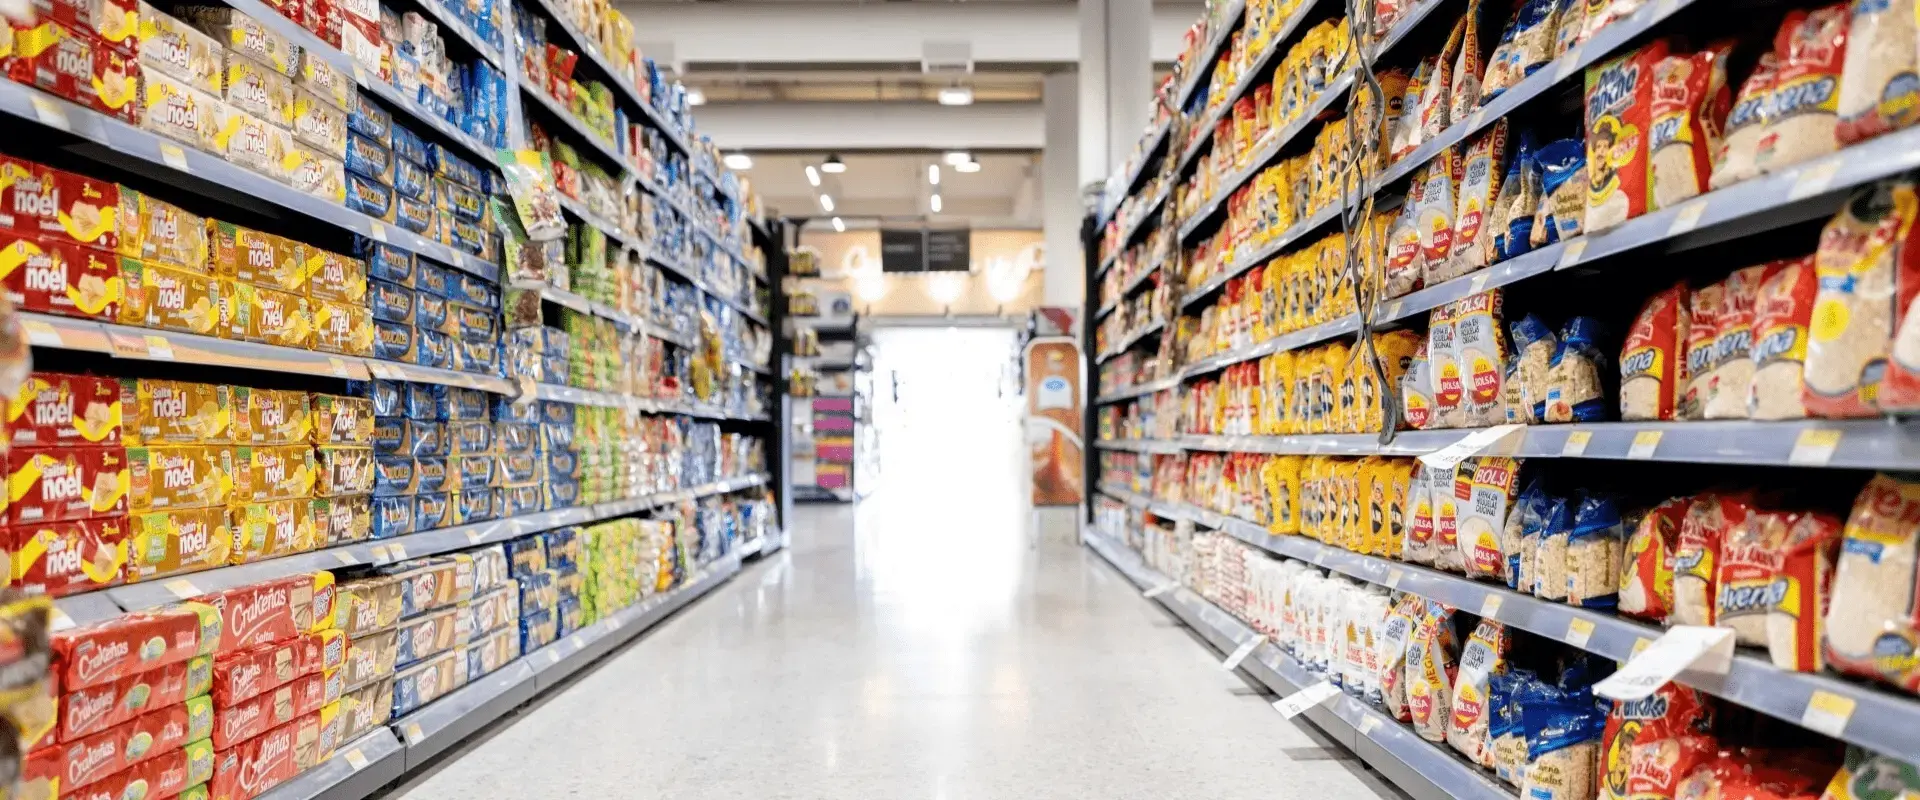 Empty aisle at a supermarket - grocery shopping concepts